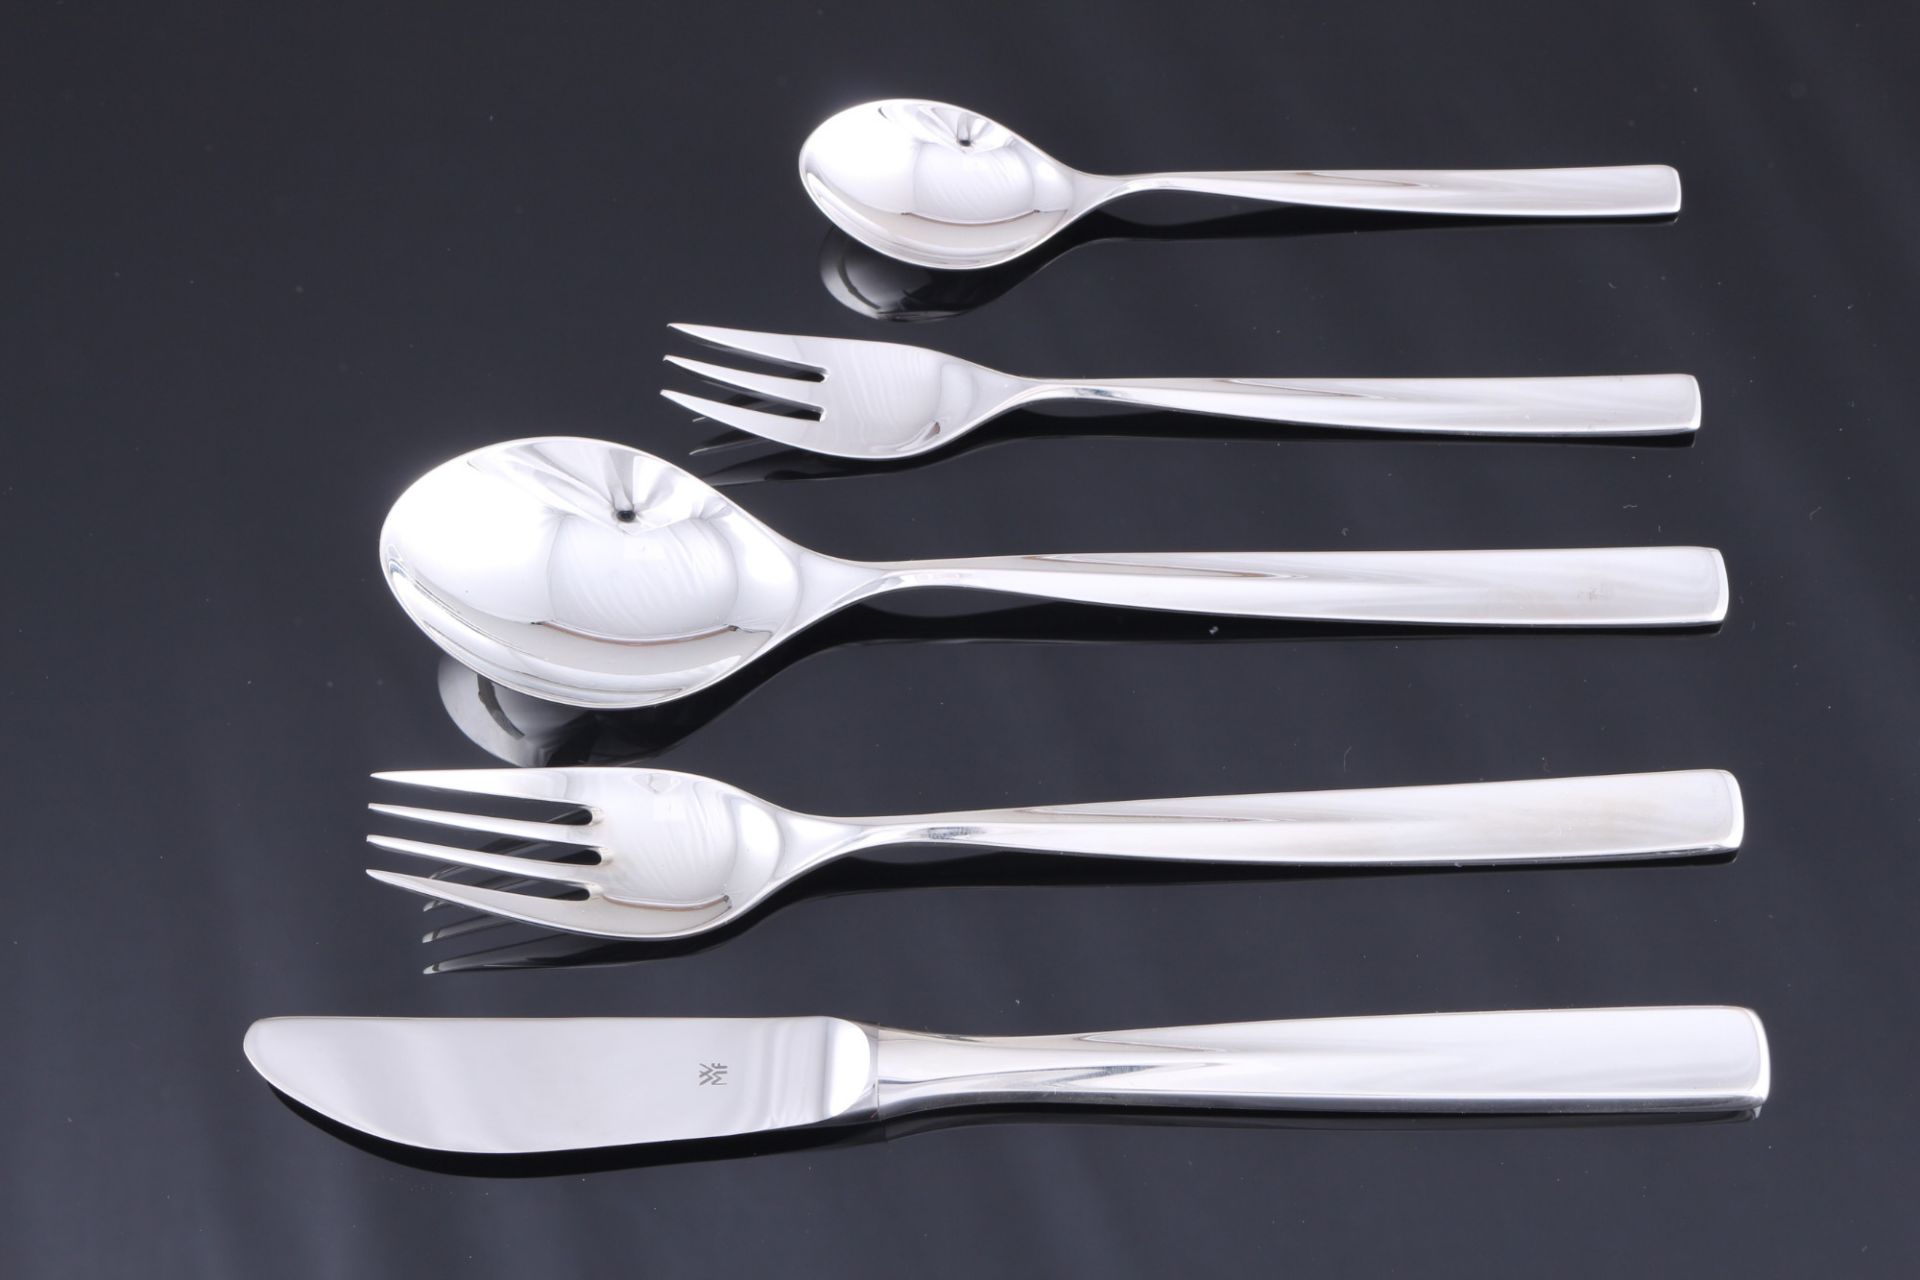 WMF Amsterdam 800 silver cutlery, Silber Besteck, - Image 2 of 5